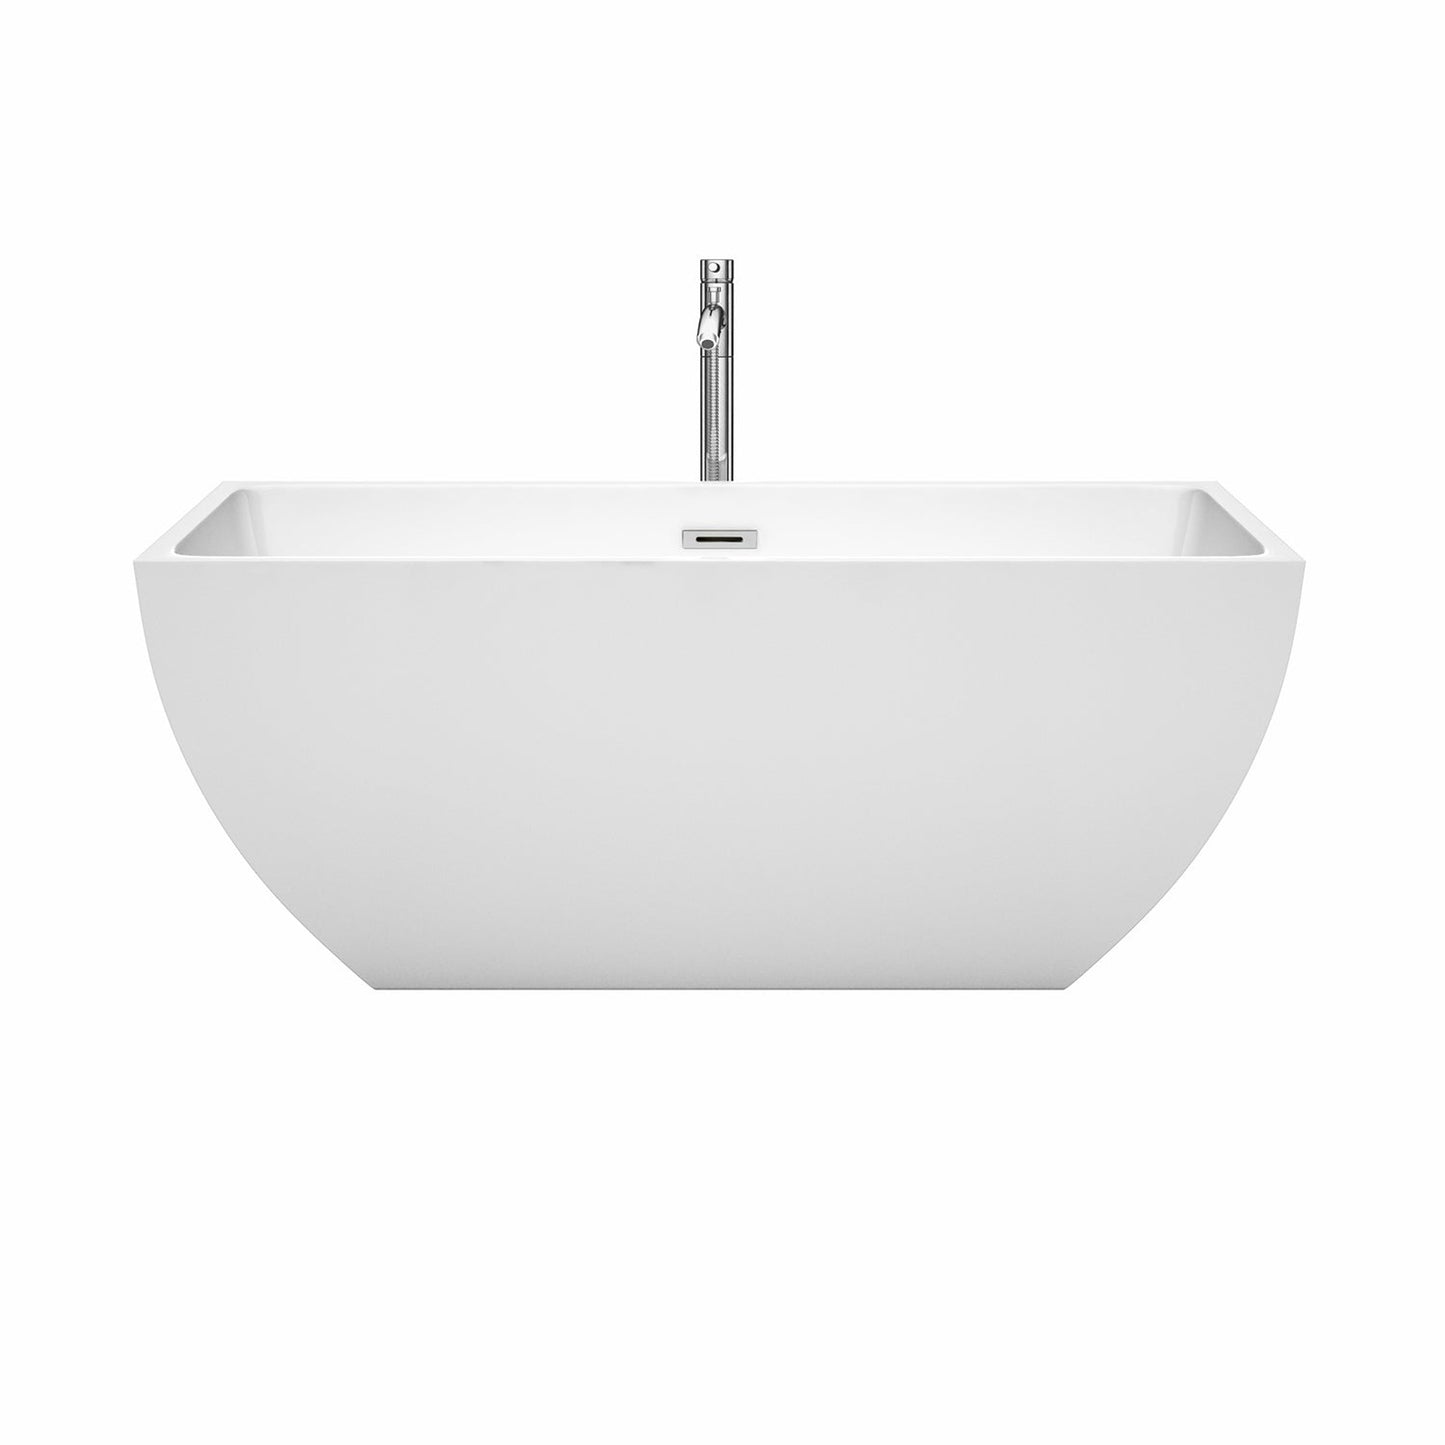 Wyndham Collection Rachel 59" Freestanding Bathtub in White With Floor Mounted Faucet, Drain and Overflow Trim in Polished Chrome